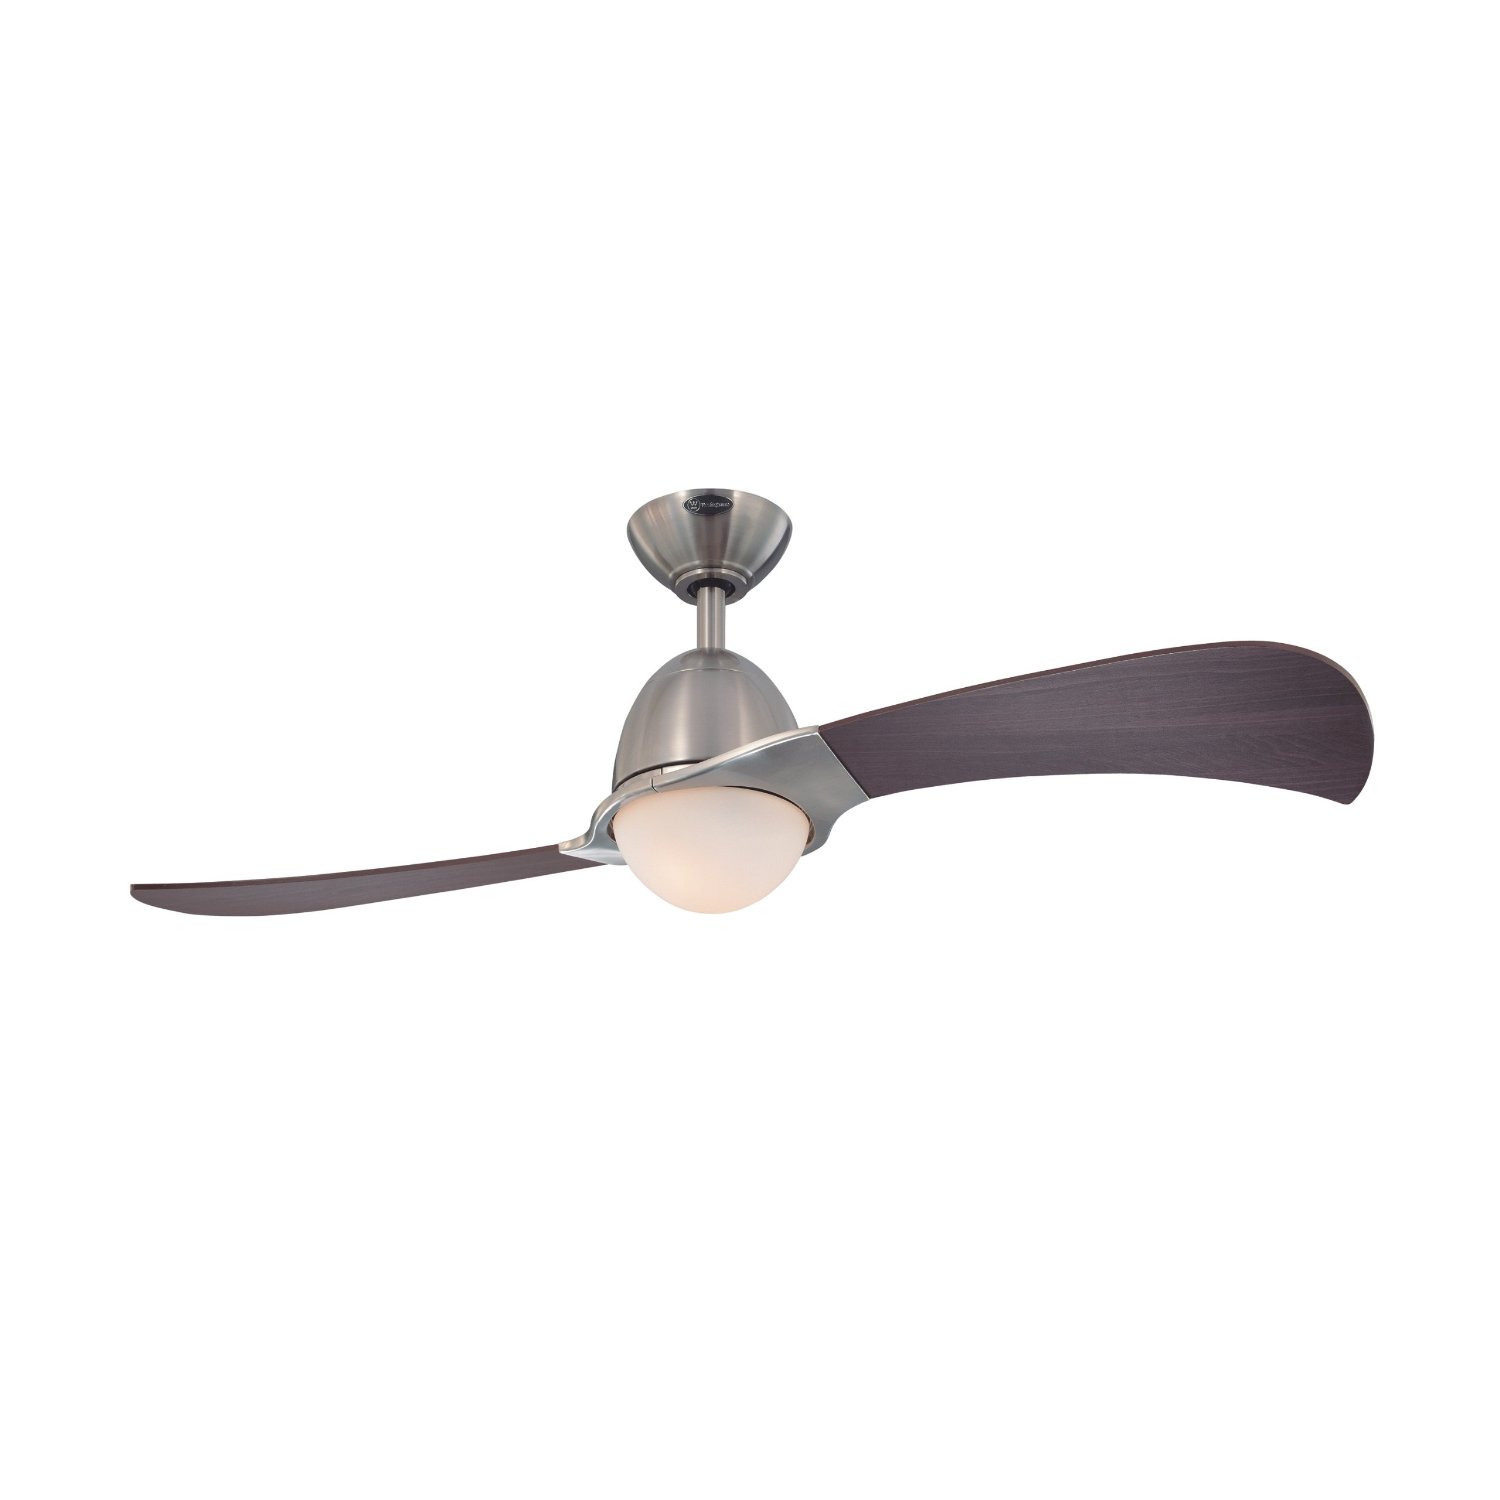 5 Best Low Profile Ceiling Fans | Tool Box